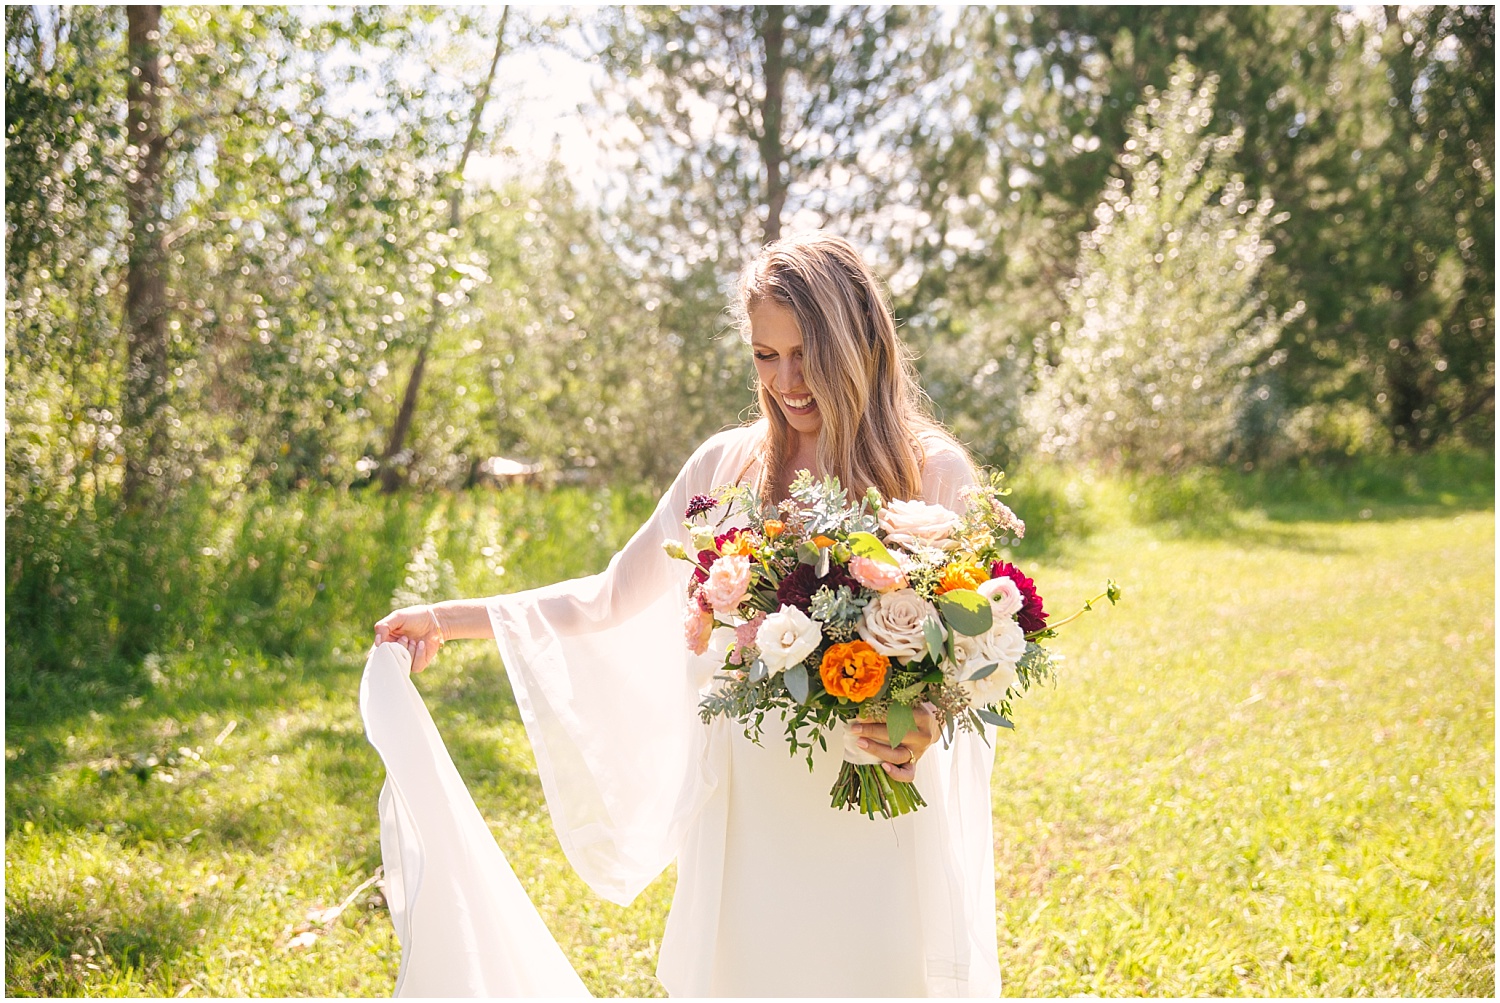 Bride with long-sleeved wedding dress by Shareen Bridal and bouquet by Fawns Leap at Lone Hawk Farm in Longmont Colorado